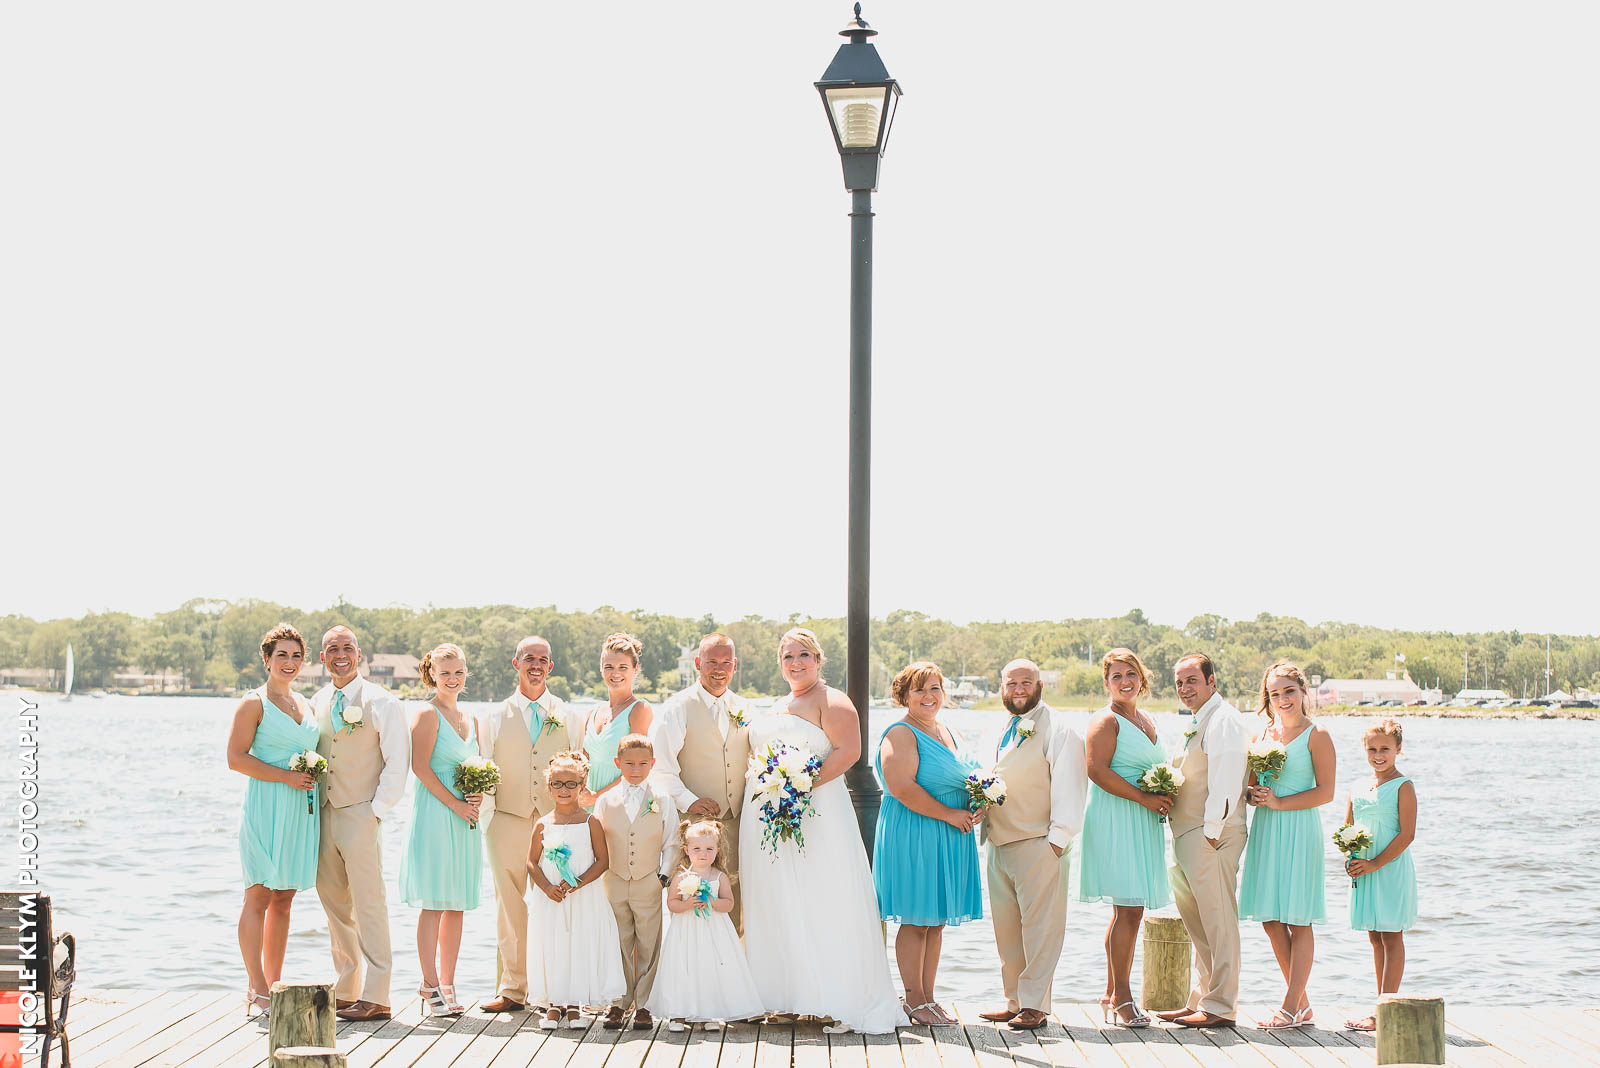 Give Your Wedding A Jersey Shore Vibe With These Wedding